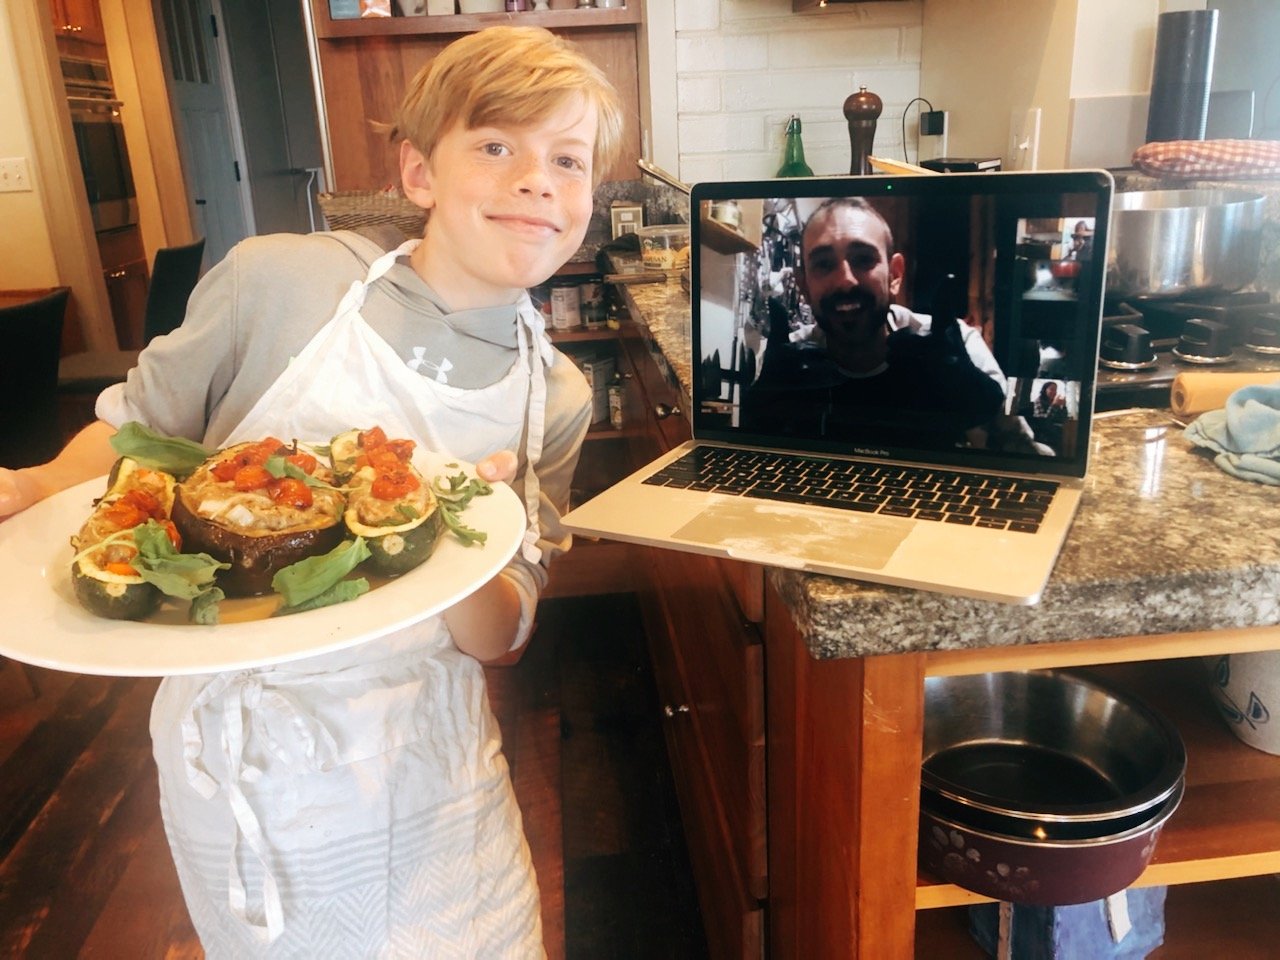 Young boy holding plate of food and smiling next to computer